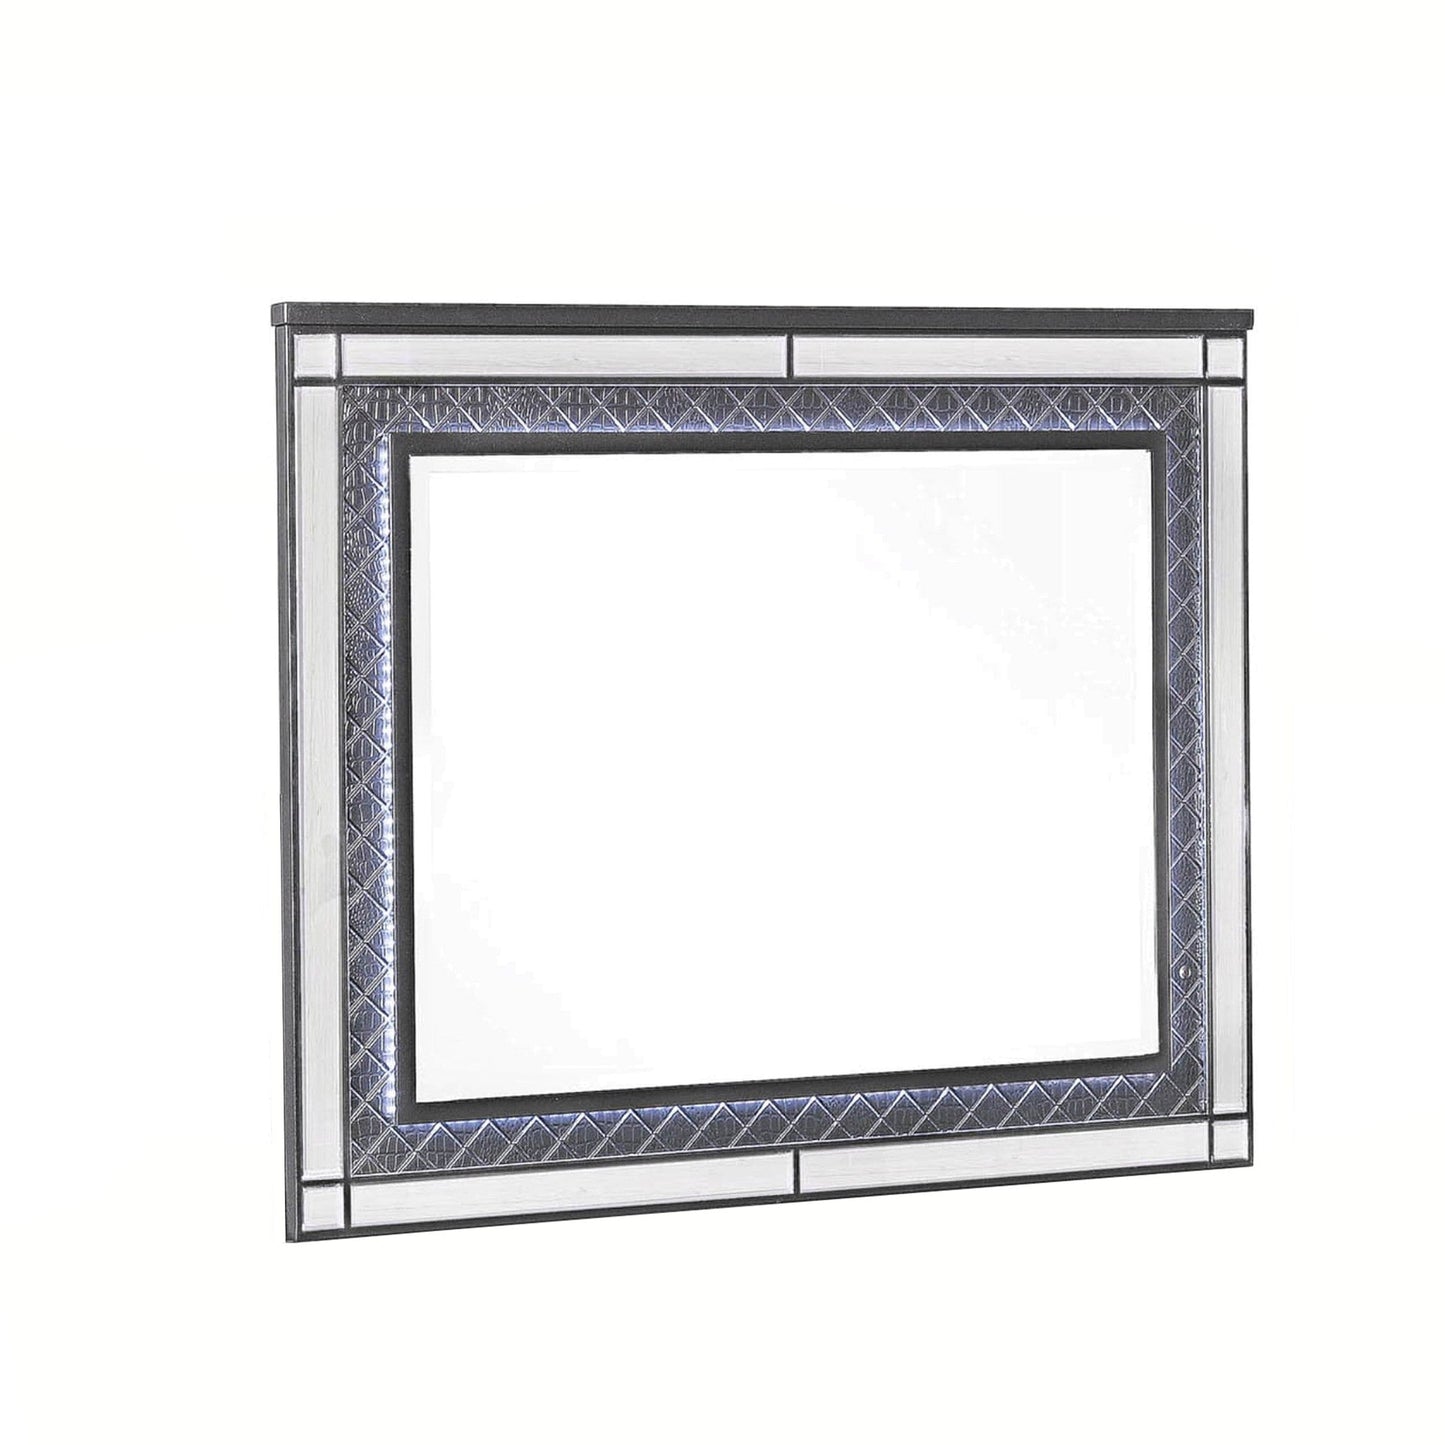 Benzara Gray and Silver LED Trim Wooden Frame Mirror With Diamond Pattern